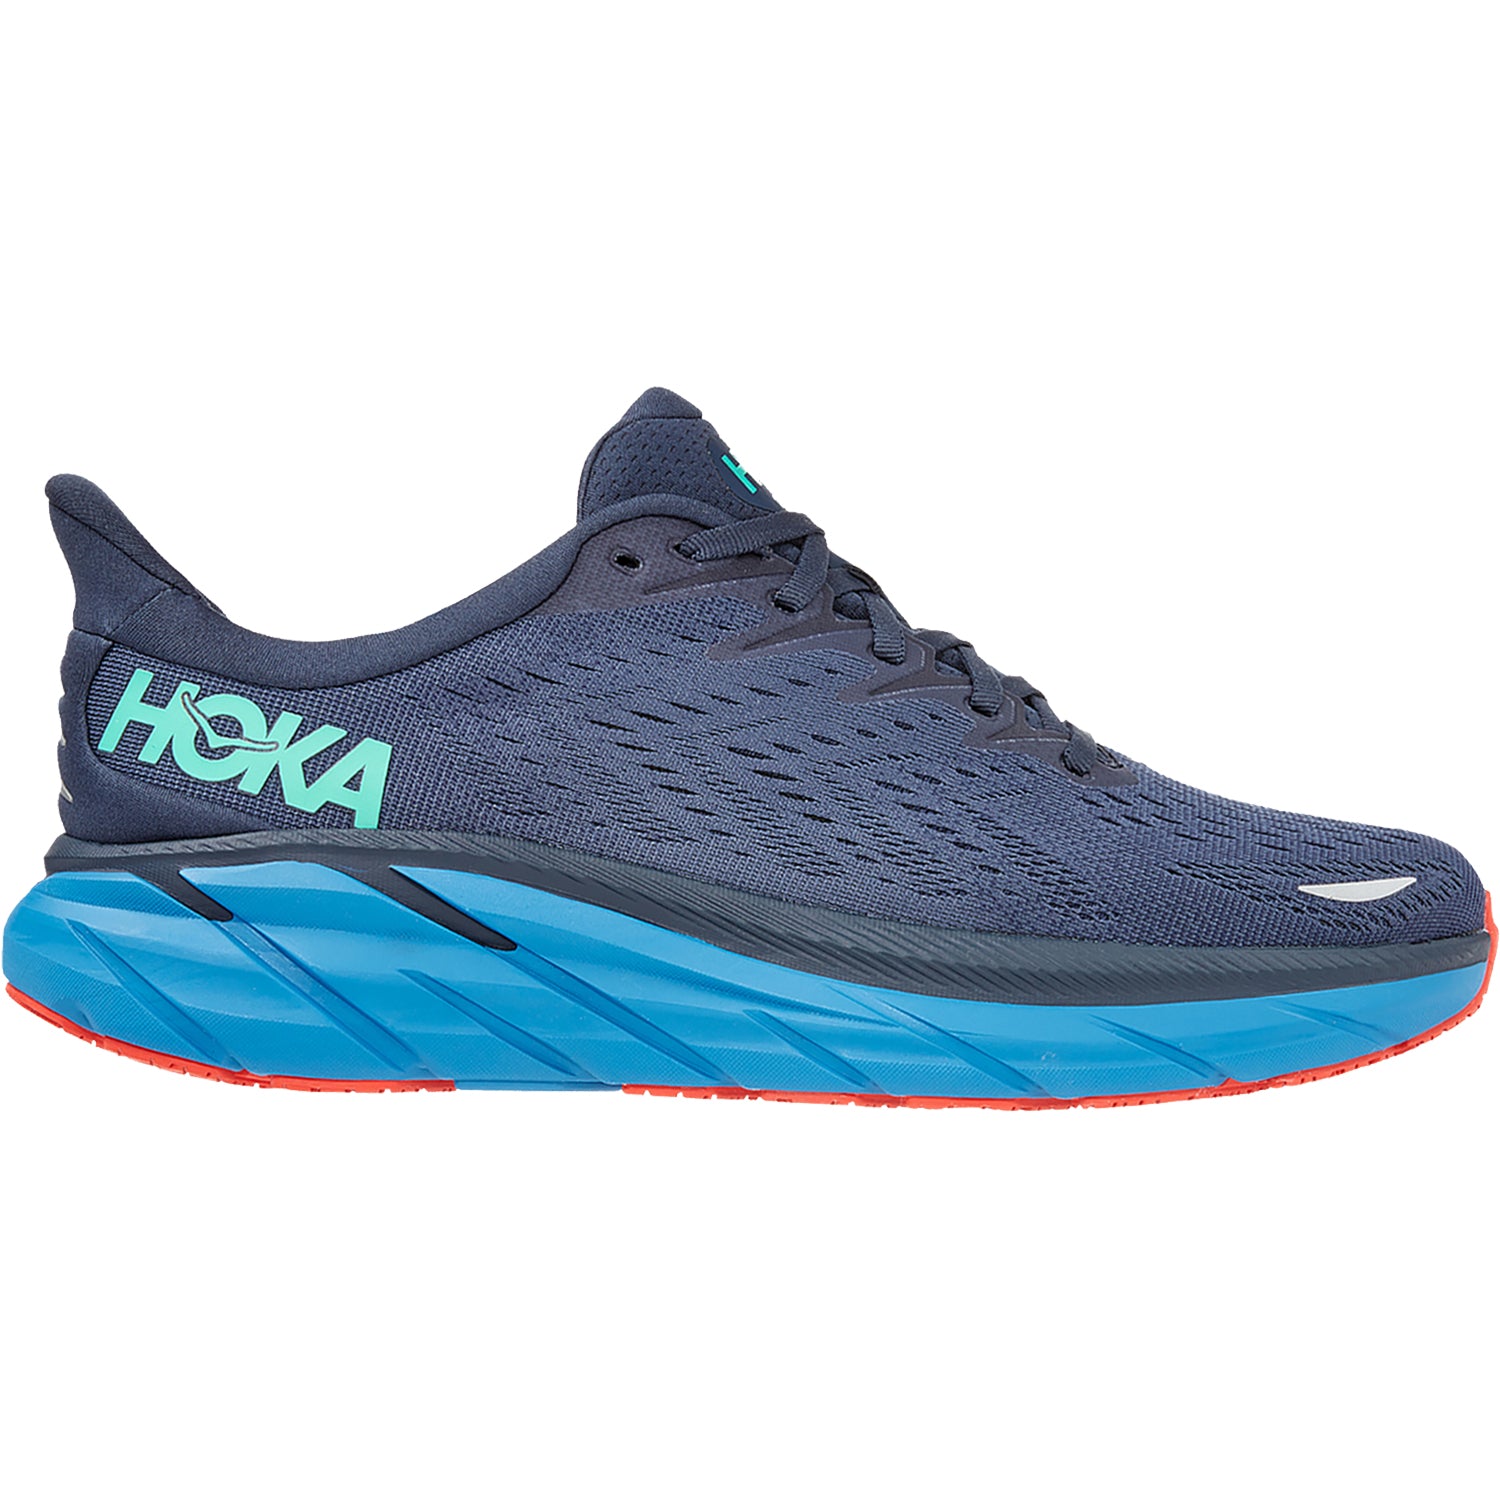 Hoka One One Clifton 8, Men's Road Running Shoes